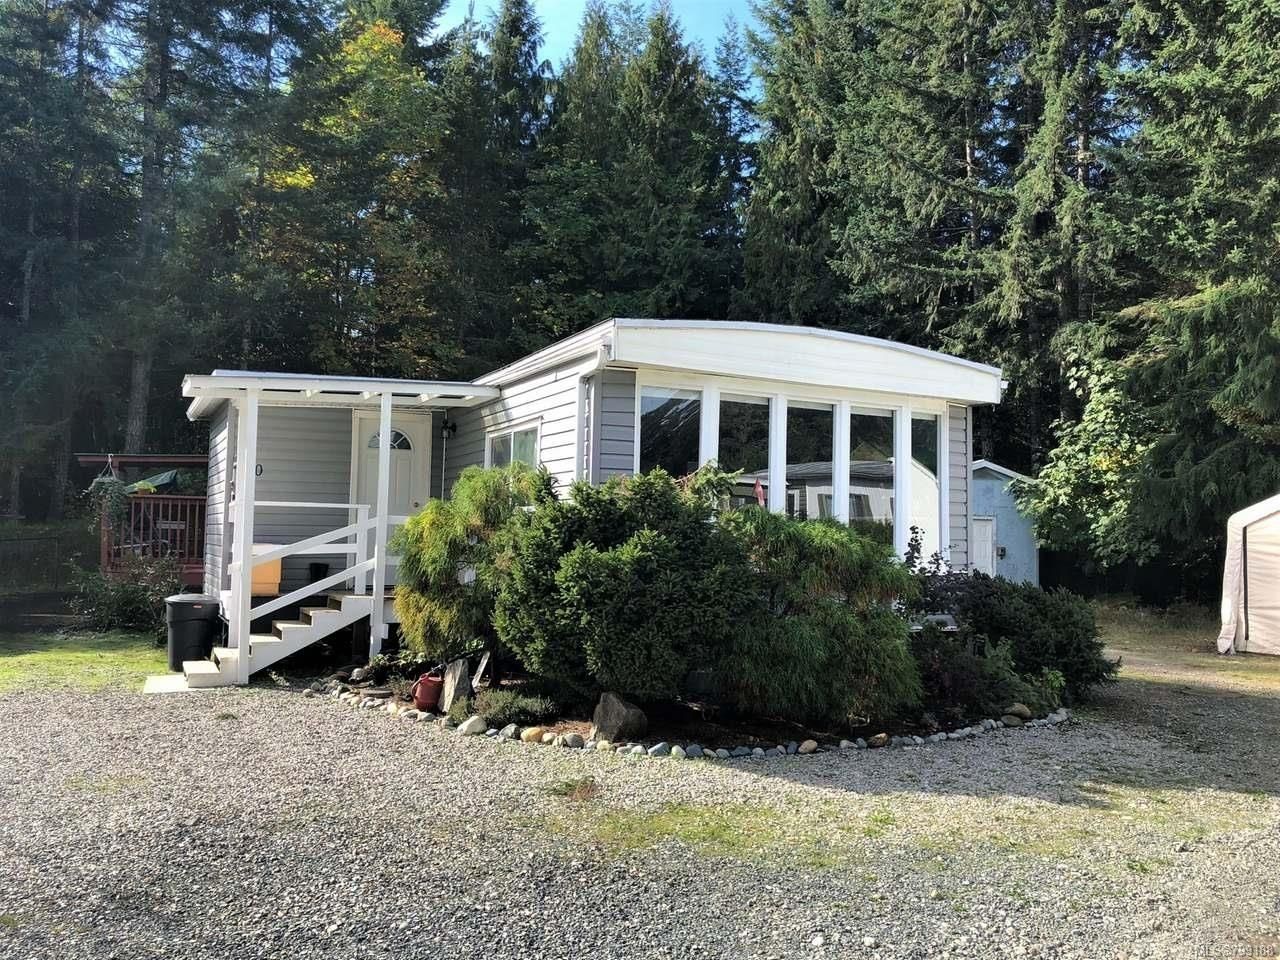 Photo 22: Photos: 10 3704 MELROSE ROAD in QUALICUM BEACH: PQ Errington/Coombs/Hilliers Manufactured Home for sale (Parksville/Qualicum)  : MLS®# 799188